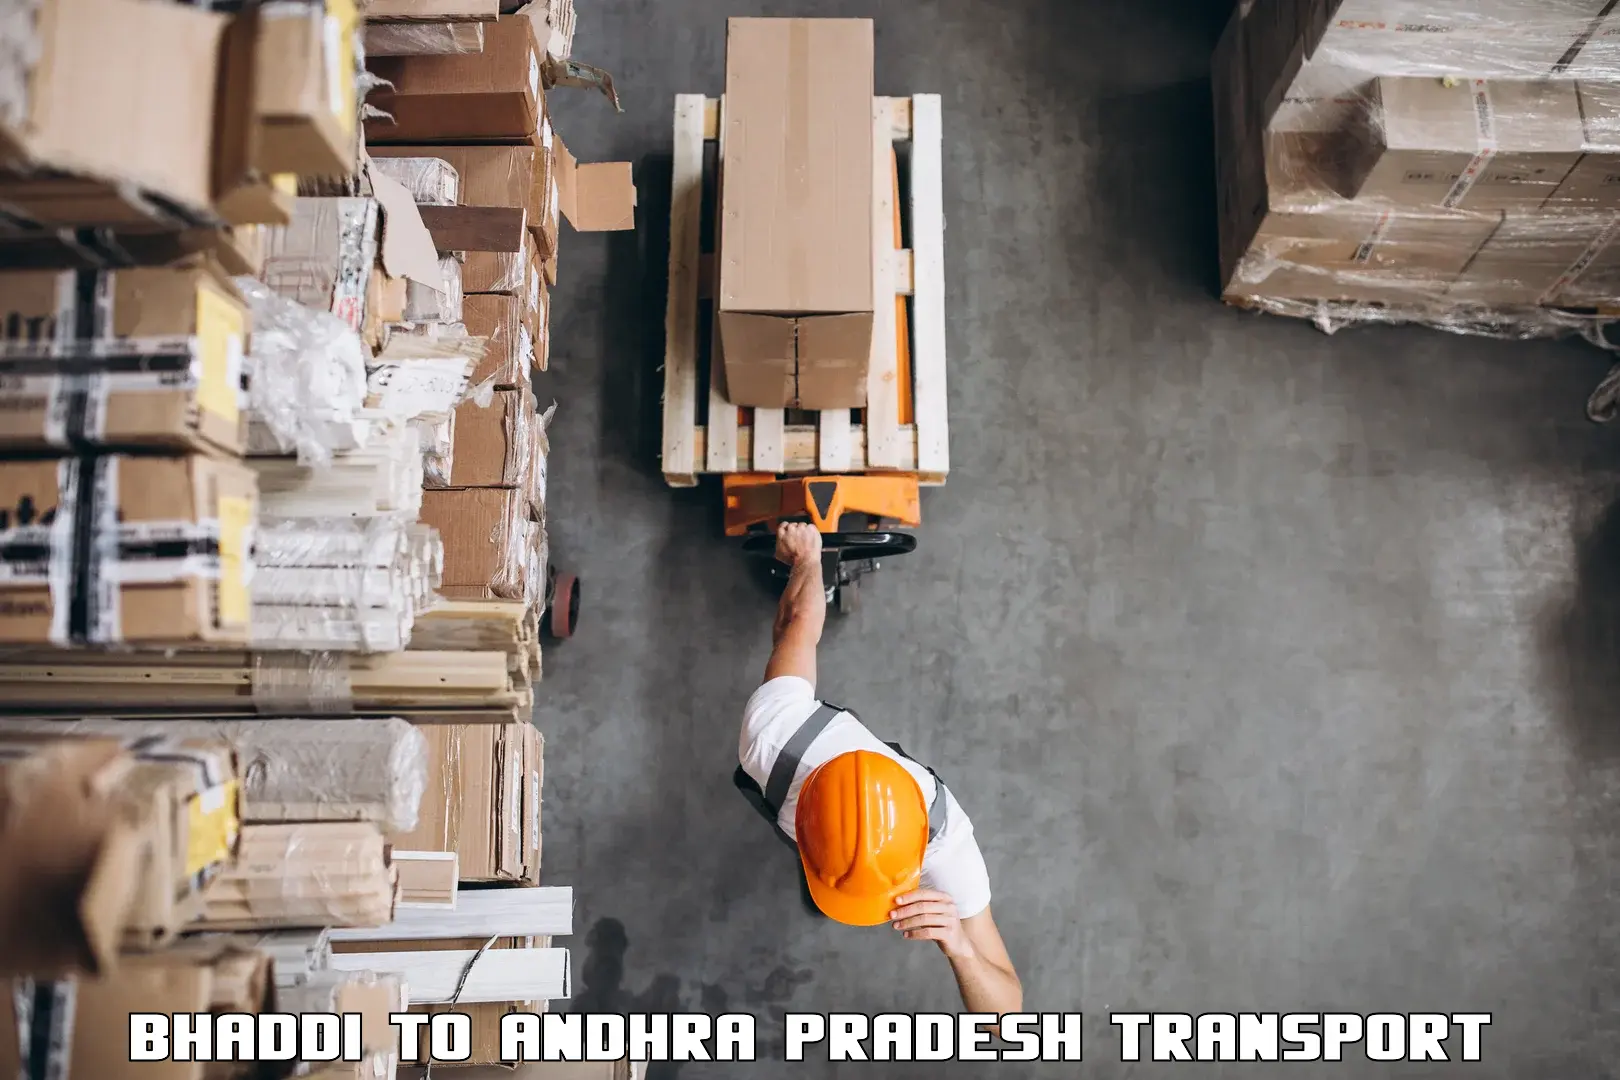 Container transport service Bhaddi to Srisailam